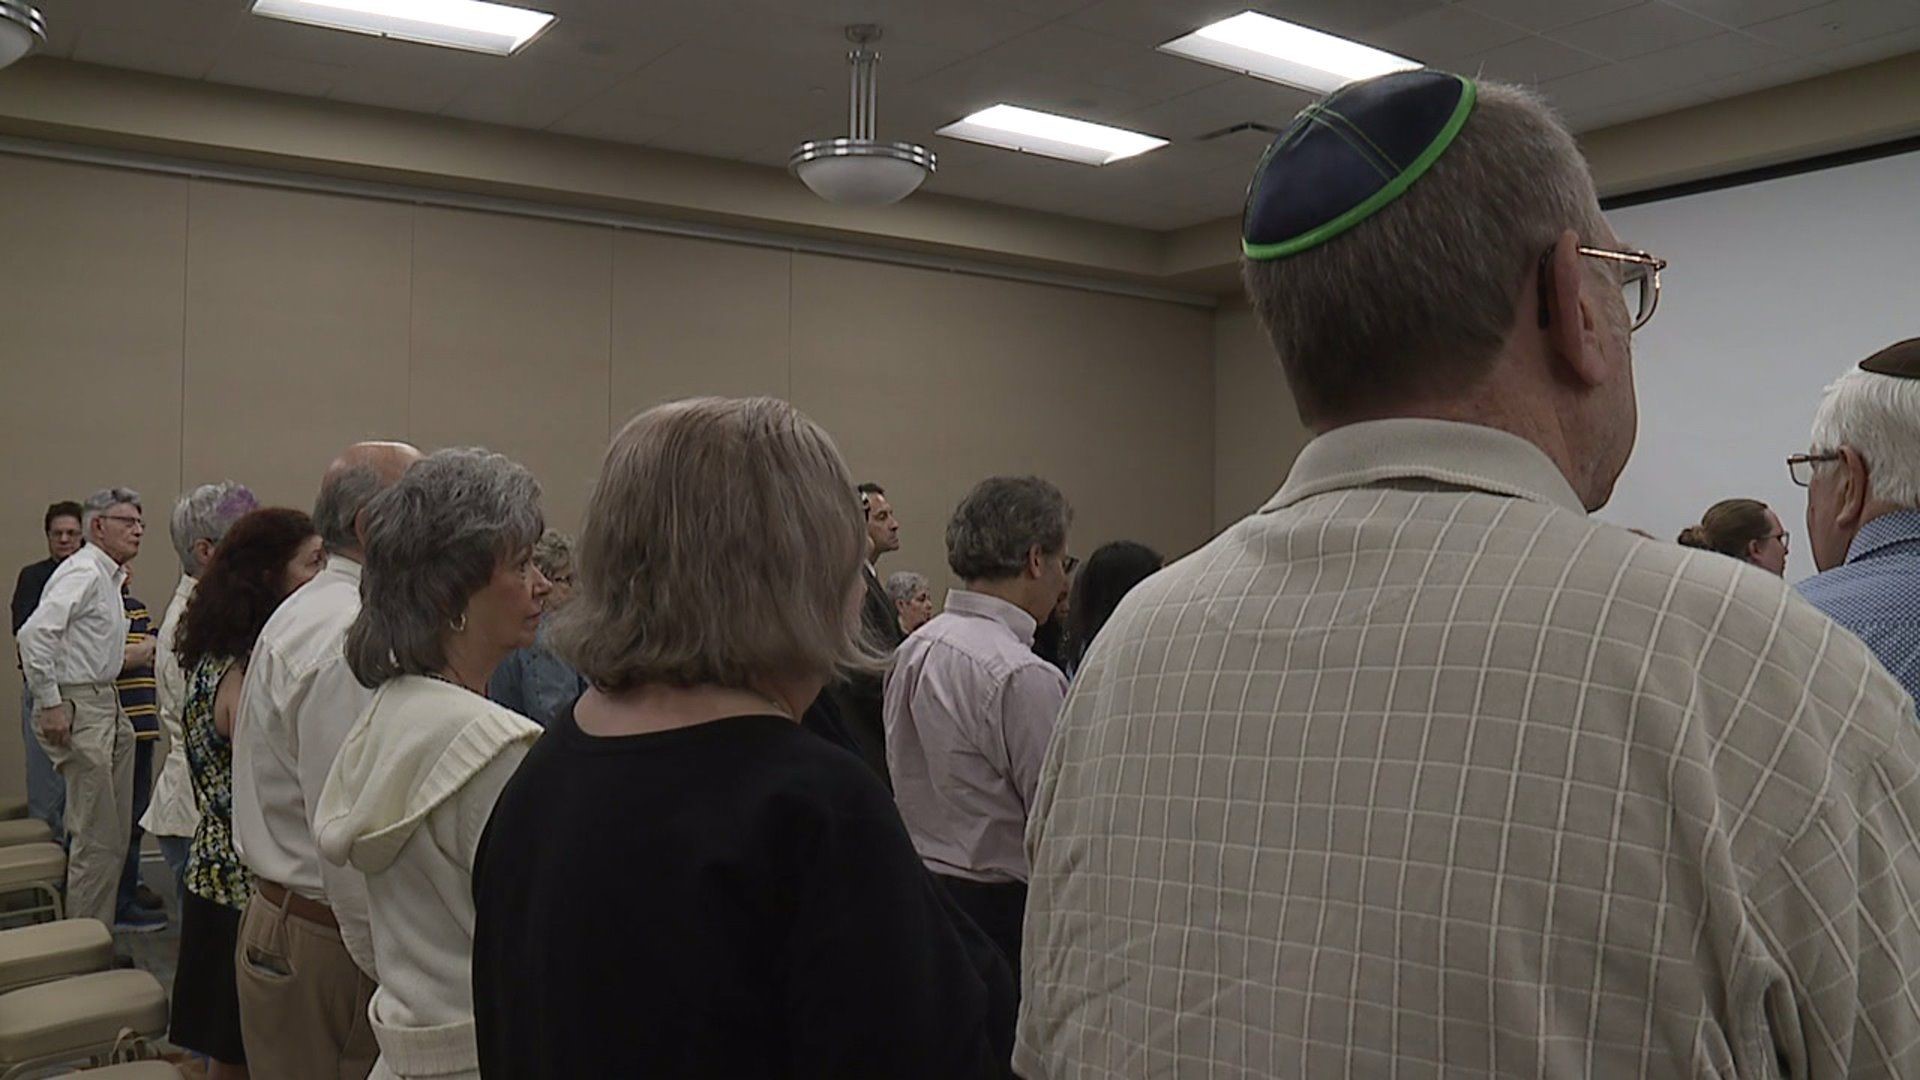 Yom HaShoah Observance in Luzerne County Includes Screening of Film